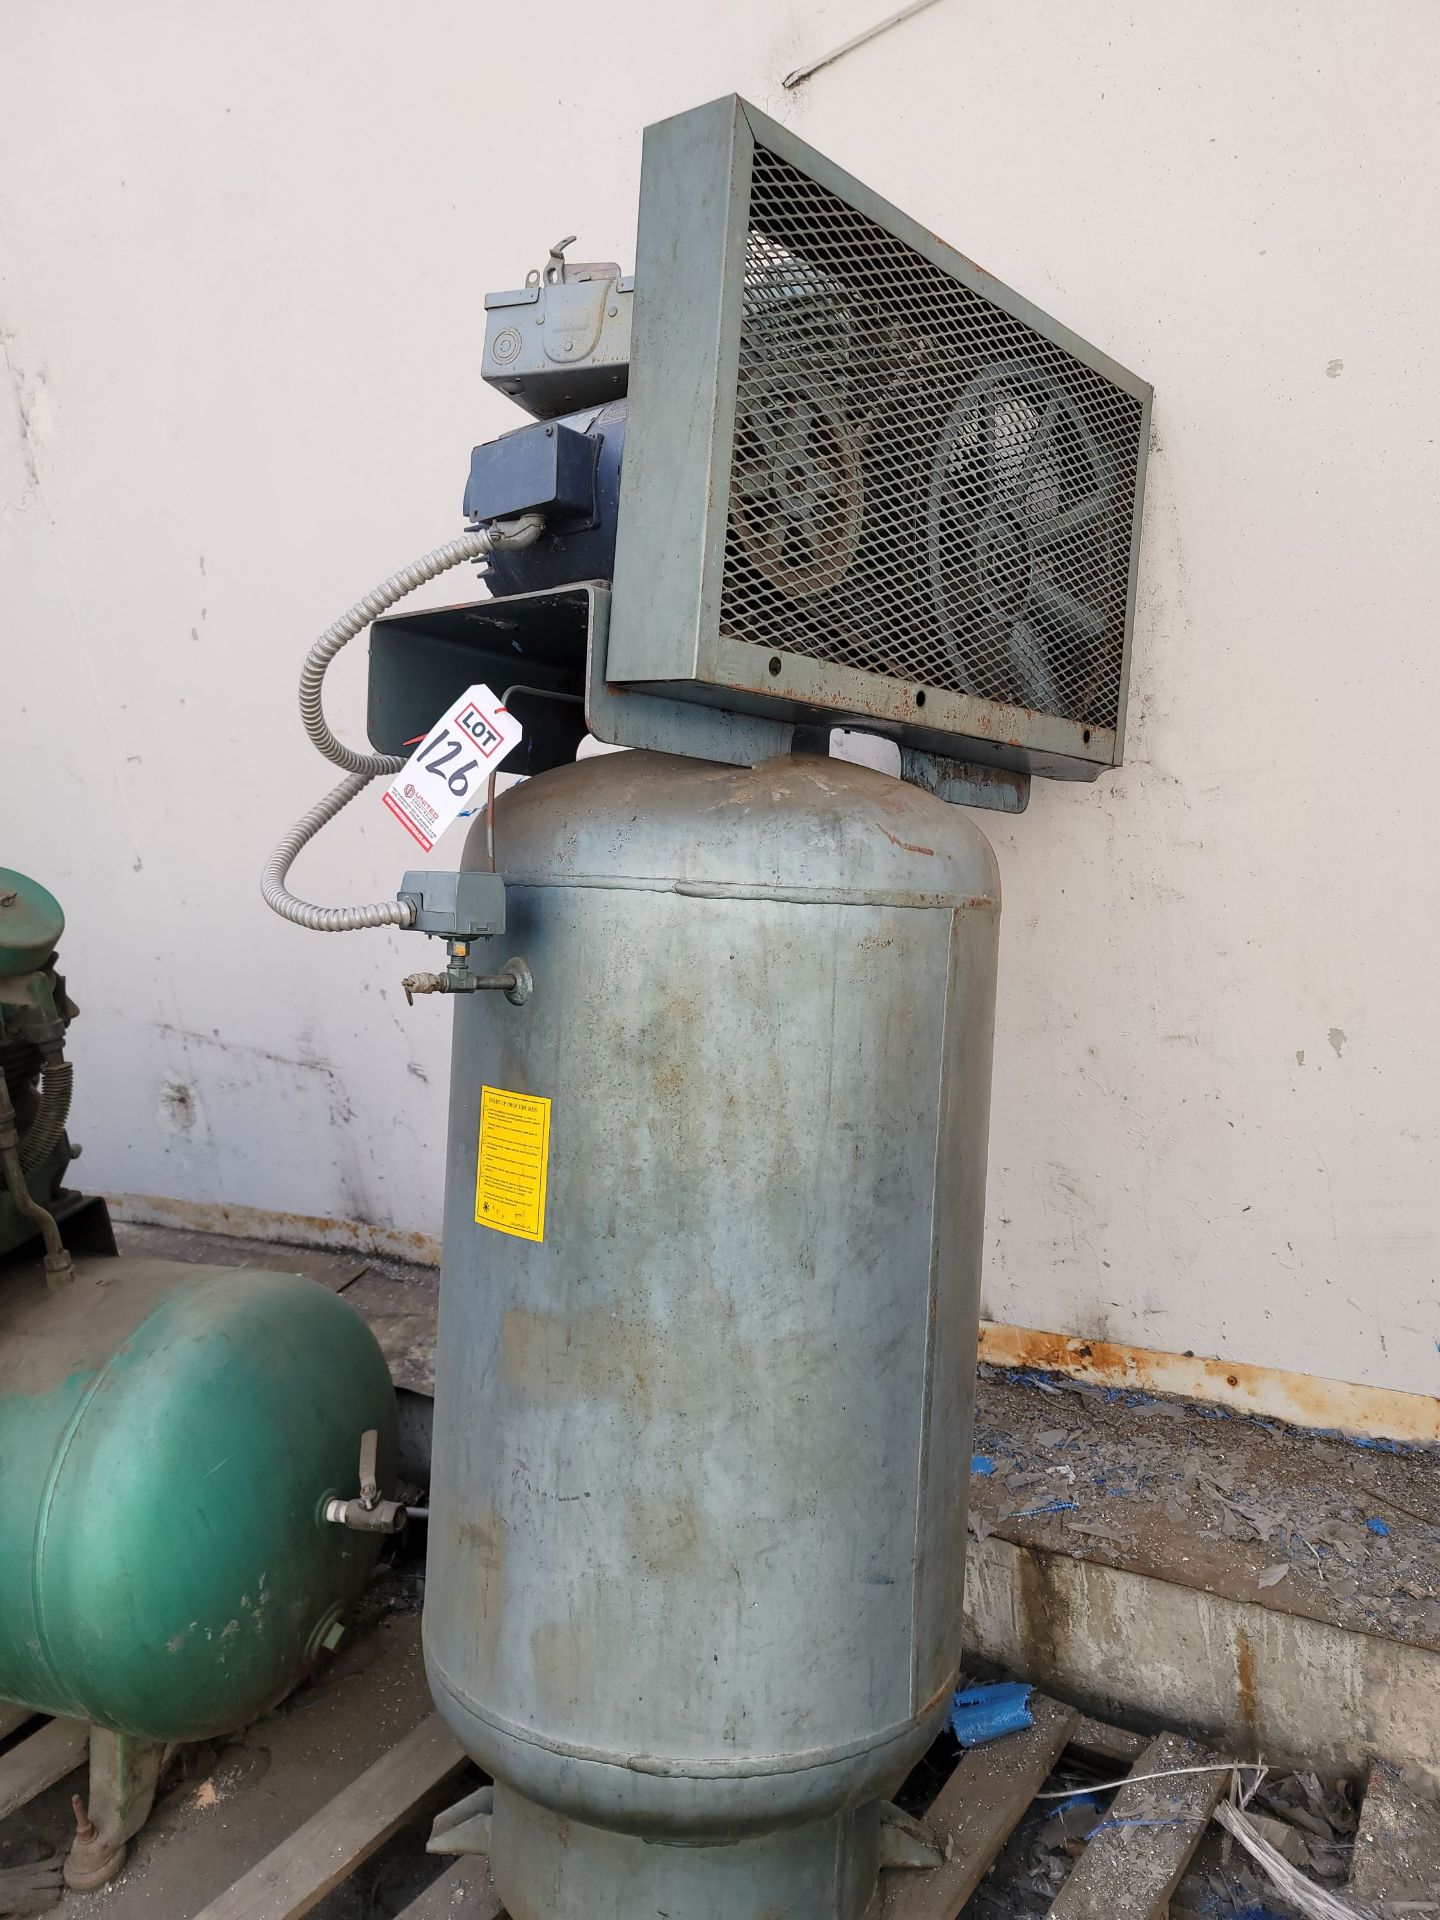 AIR COMPRESSOR PRODUCTS 5 HP VERTICAL AIR COMPRESSOR, MODEL ACP-51V82, OUT OF SERVICE / NEEDS WORK - Image 2 of 2